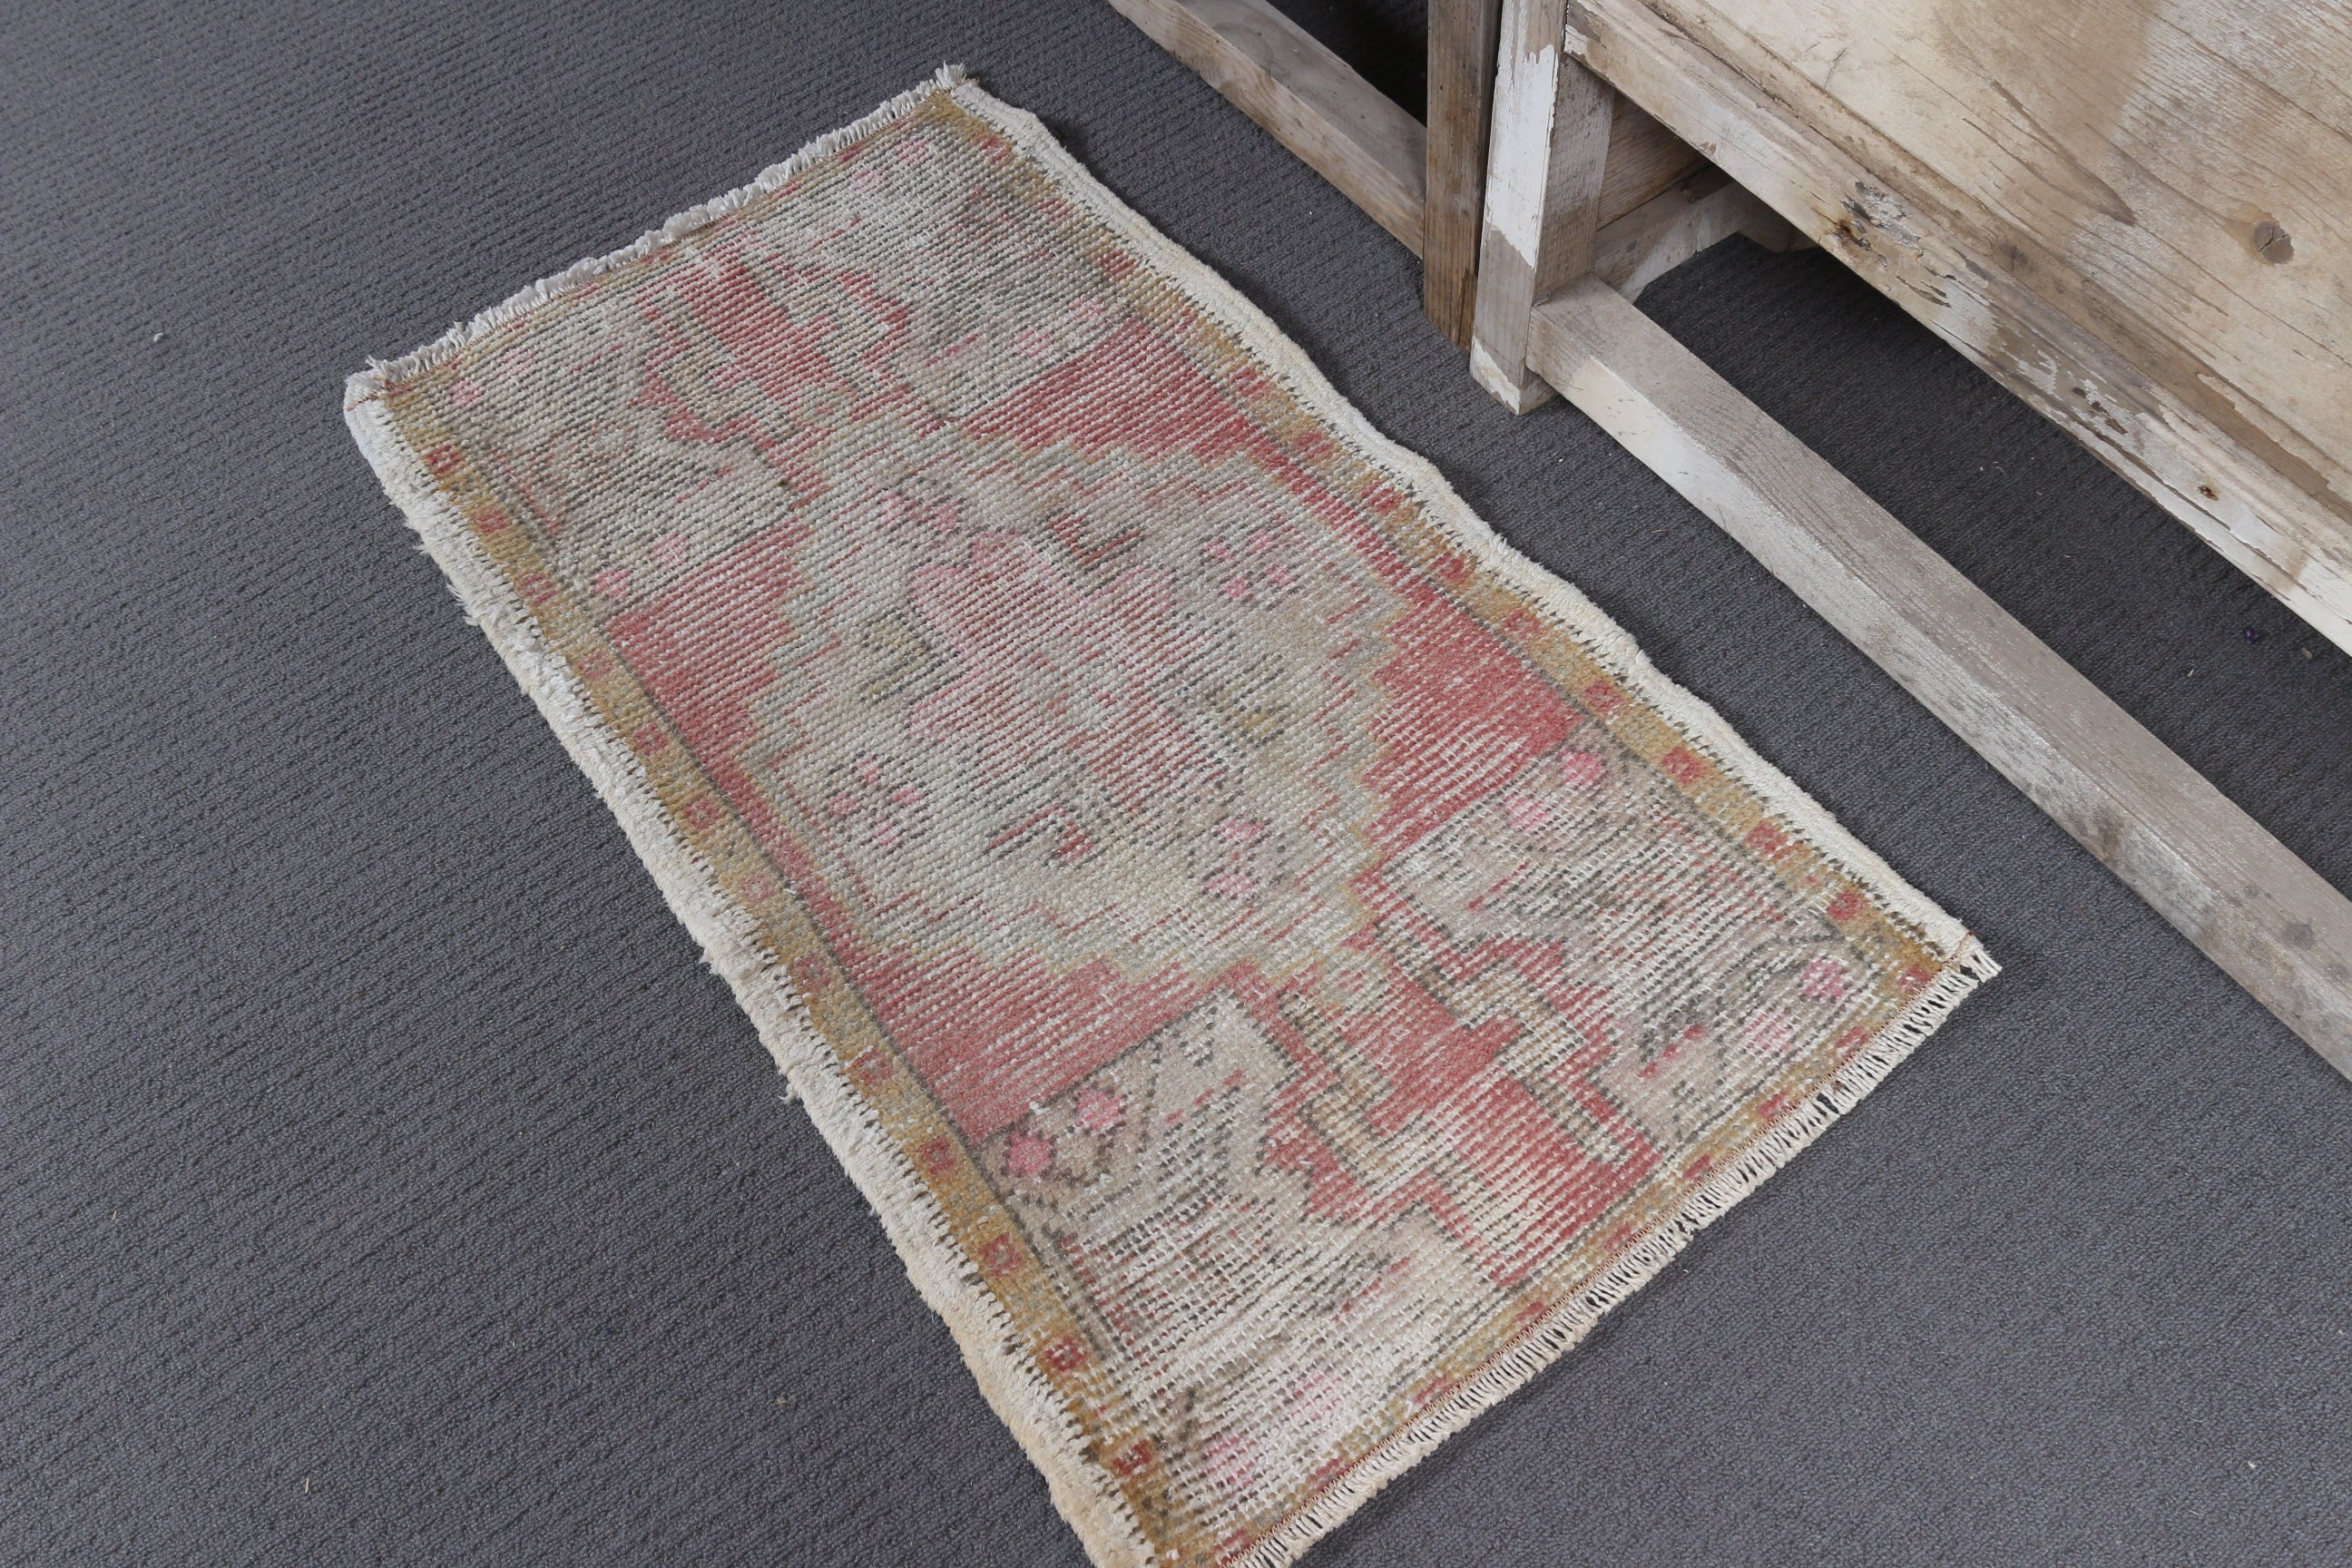 Turkish Rug, Pink Kitchen Rugs, Car Mat Rugs, Rugs for Entry, Vintage Rugs, Door Mat Rug, Oriental Rug, Kitchen Rug, 1.5x2.8 ft Small Rugs